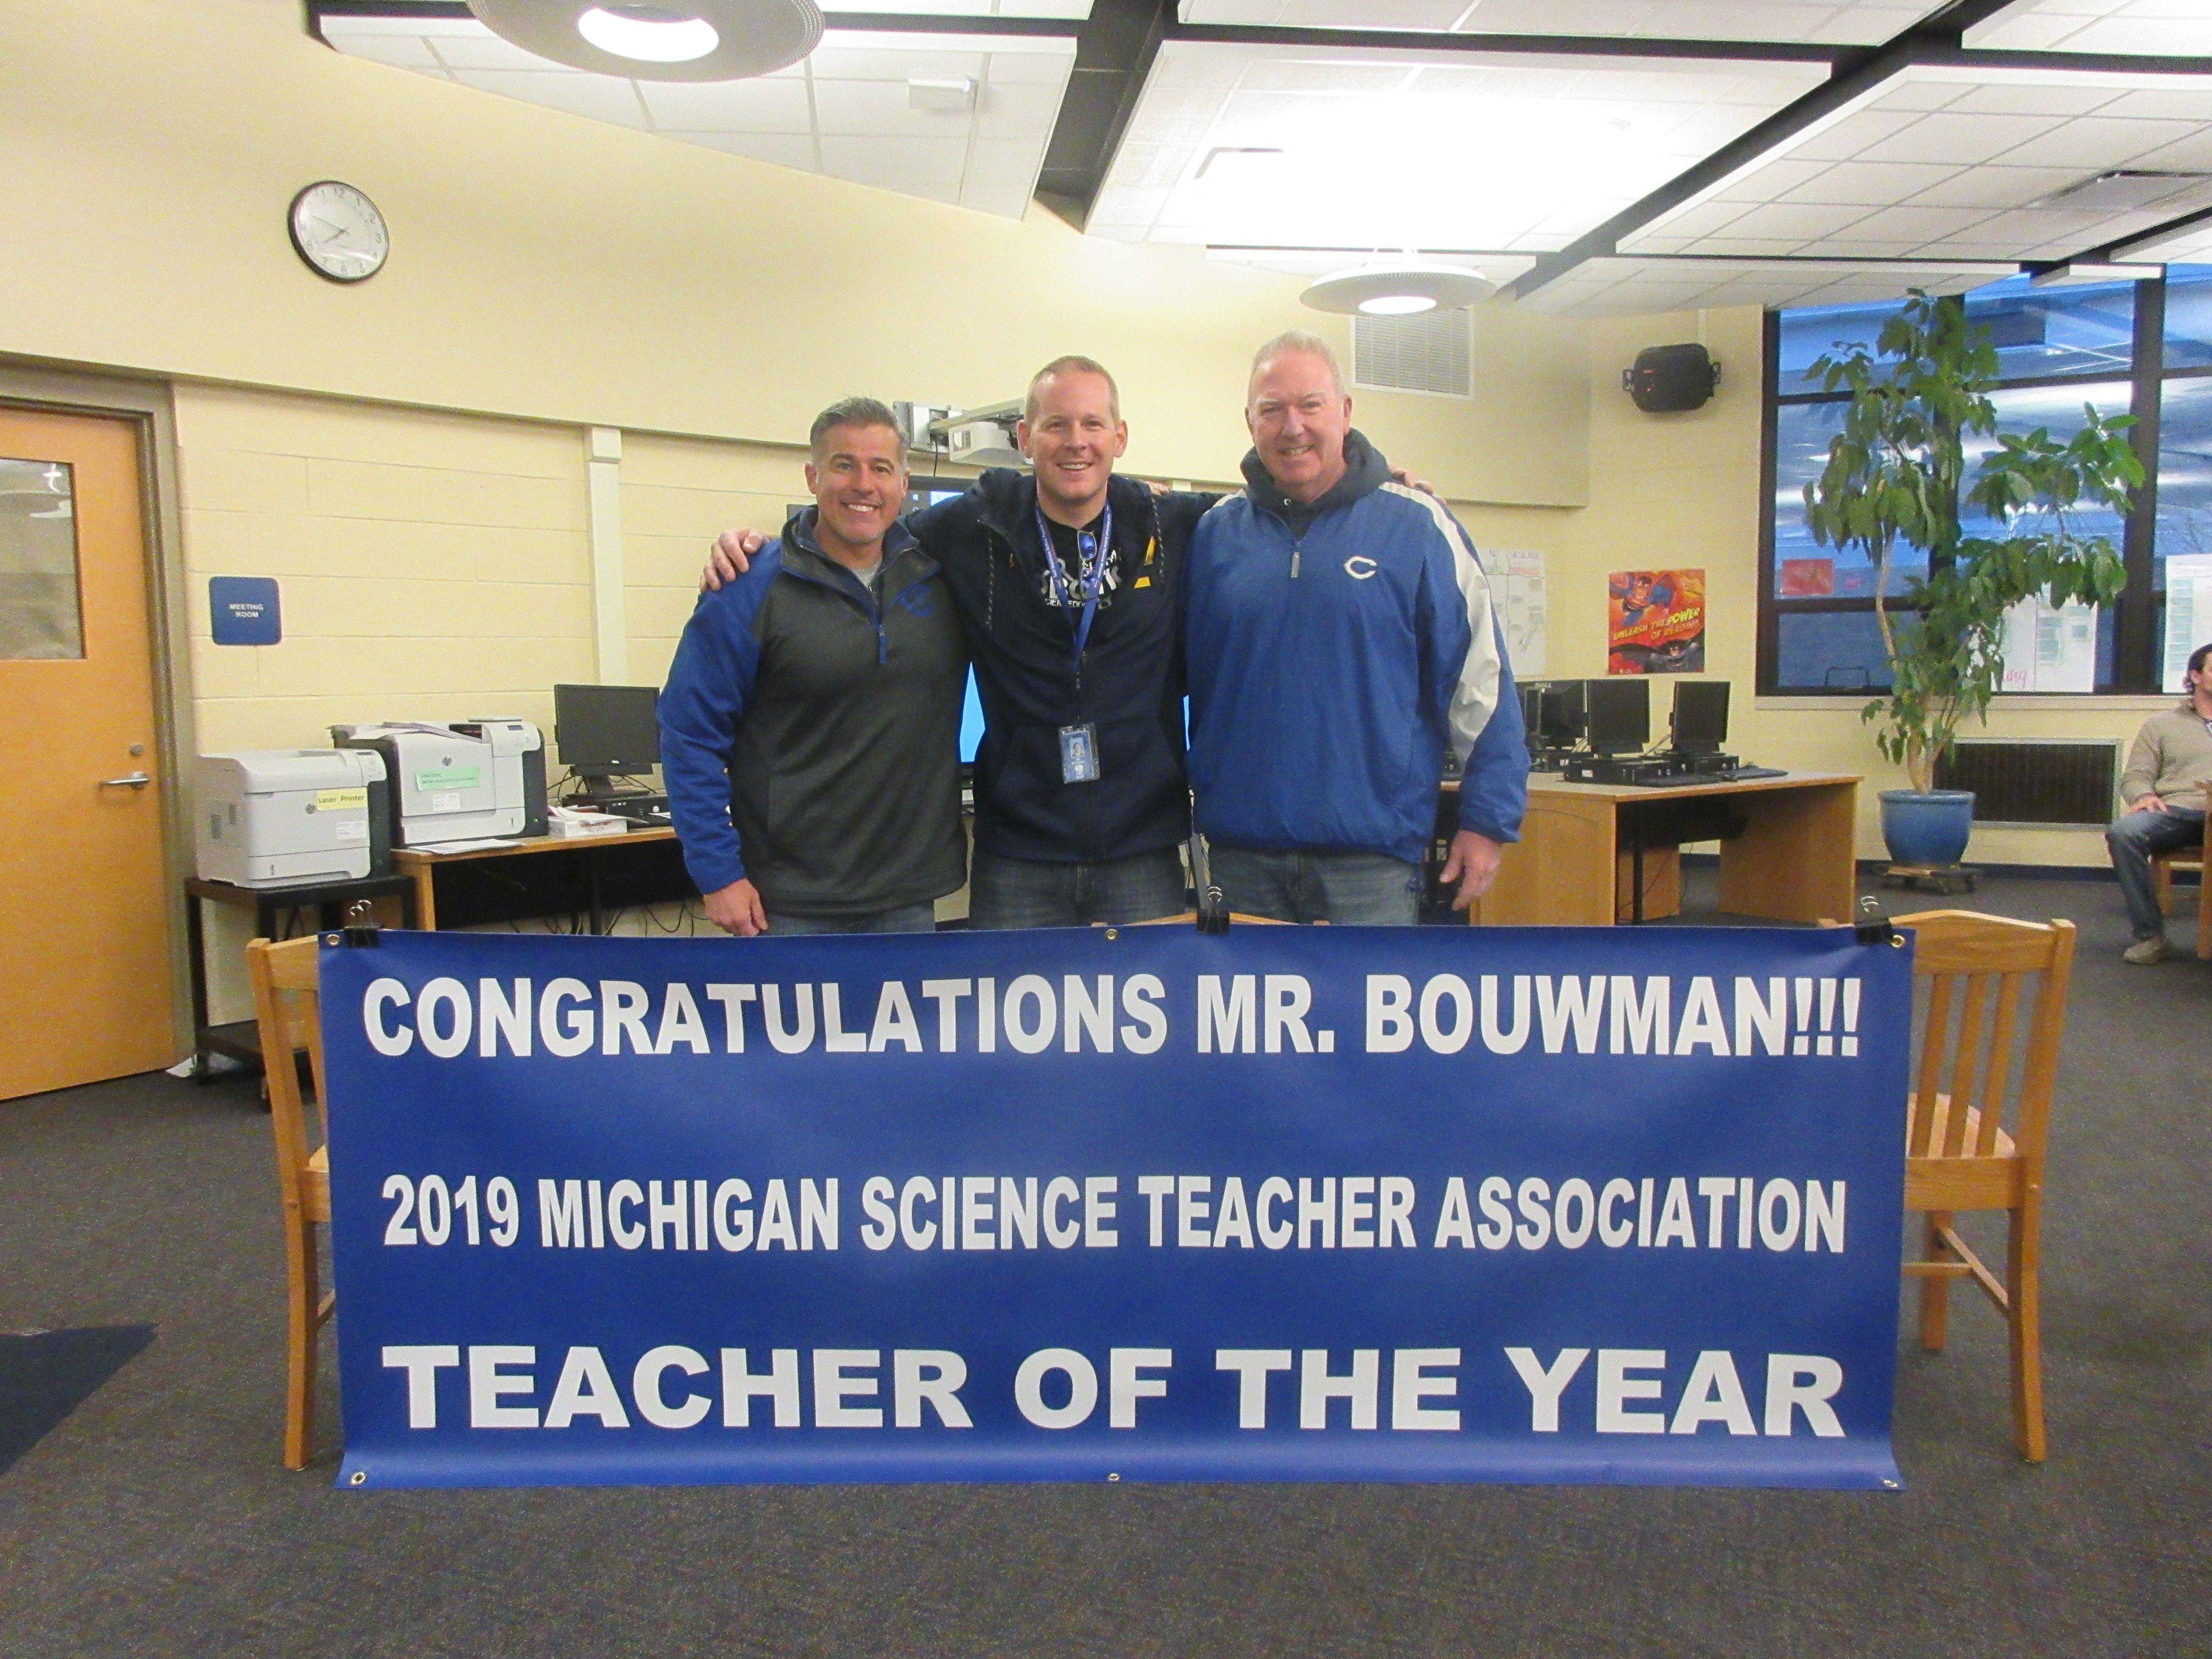 Jeffrey being honored as Middle School Teacher of the Year 2019